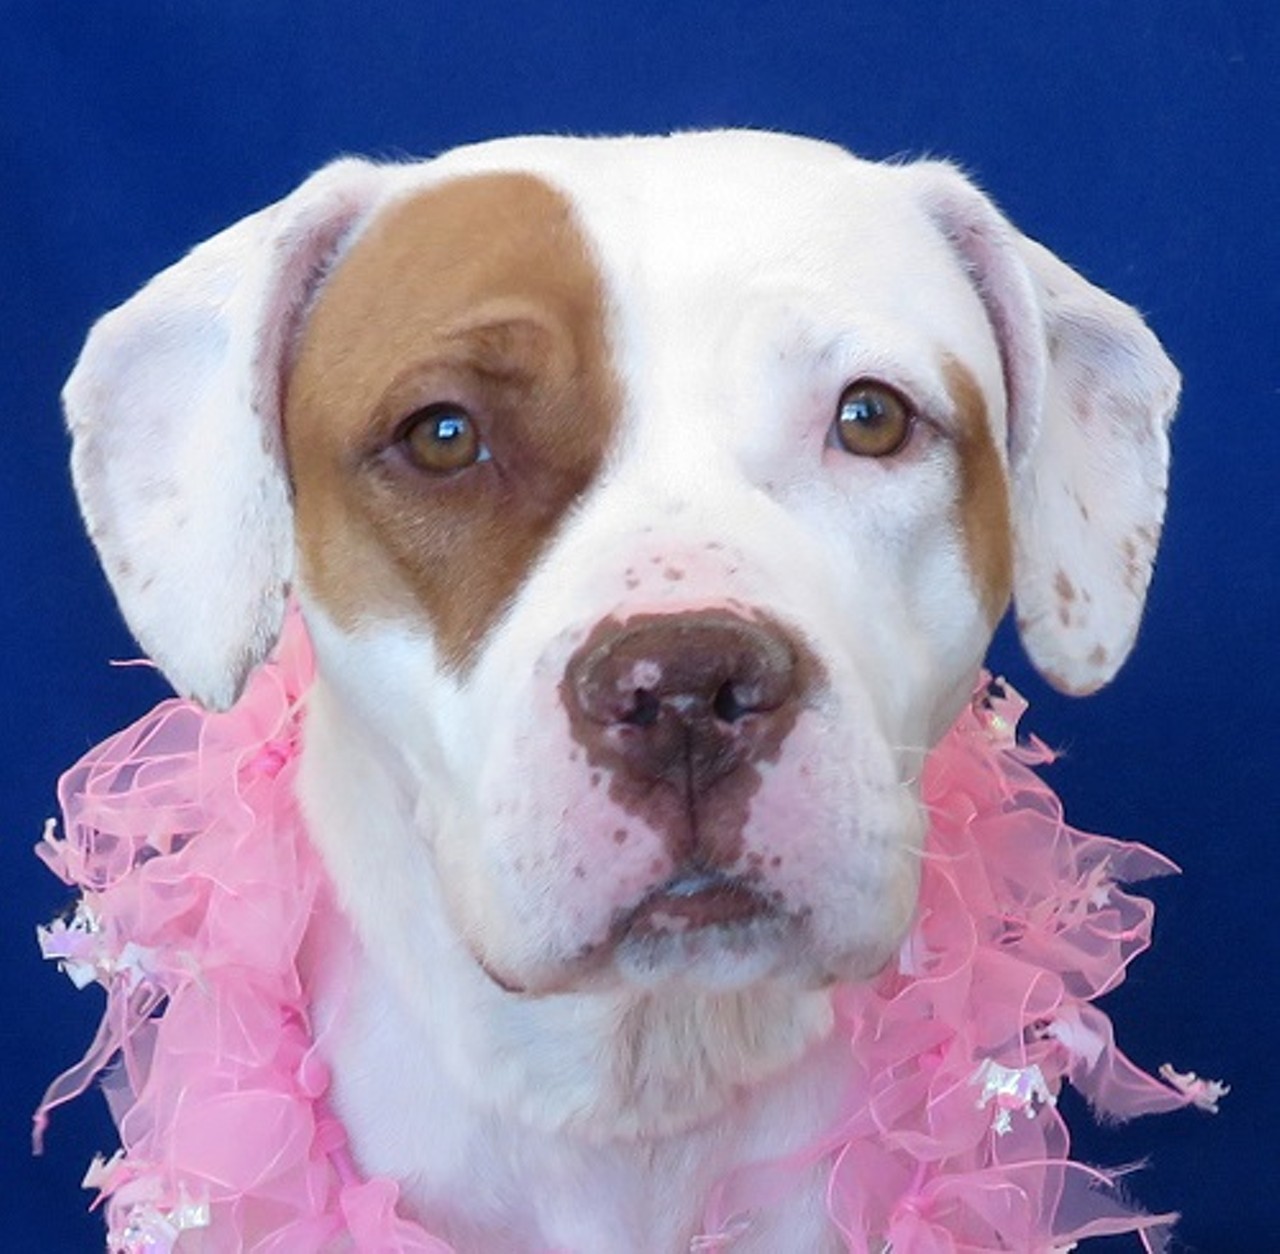 NAME: Lolly
GENDER: Female
BREED: Pit Bull Terrier
AGE: 2 years
WEIGHT: 49 pounds
SPECIAL CONSIDERATIONS: None
REASON I CAME TO MHS: Agency transfer
LOCATION: Mackey Center for Animal Care in Detroit
ID NUMBER: 863028